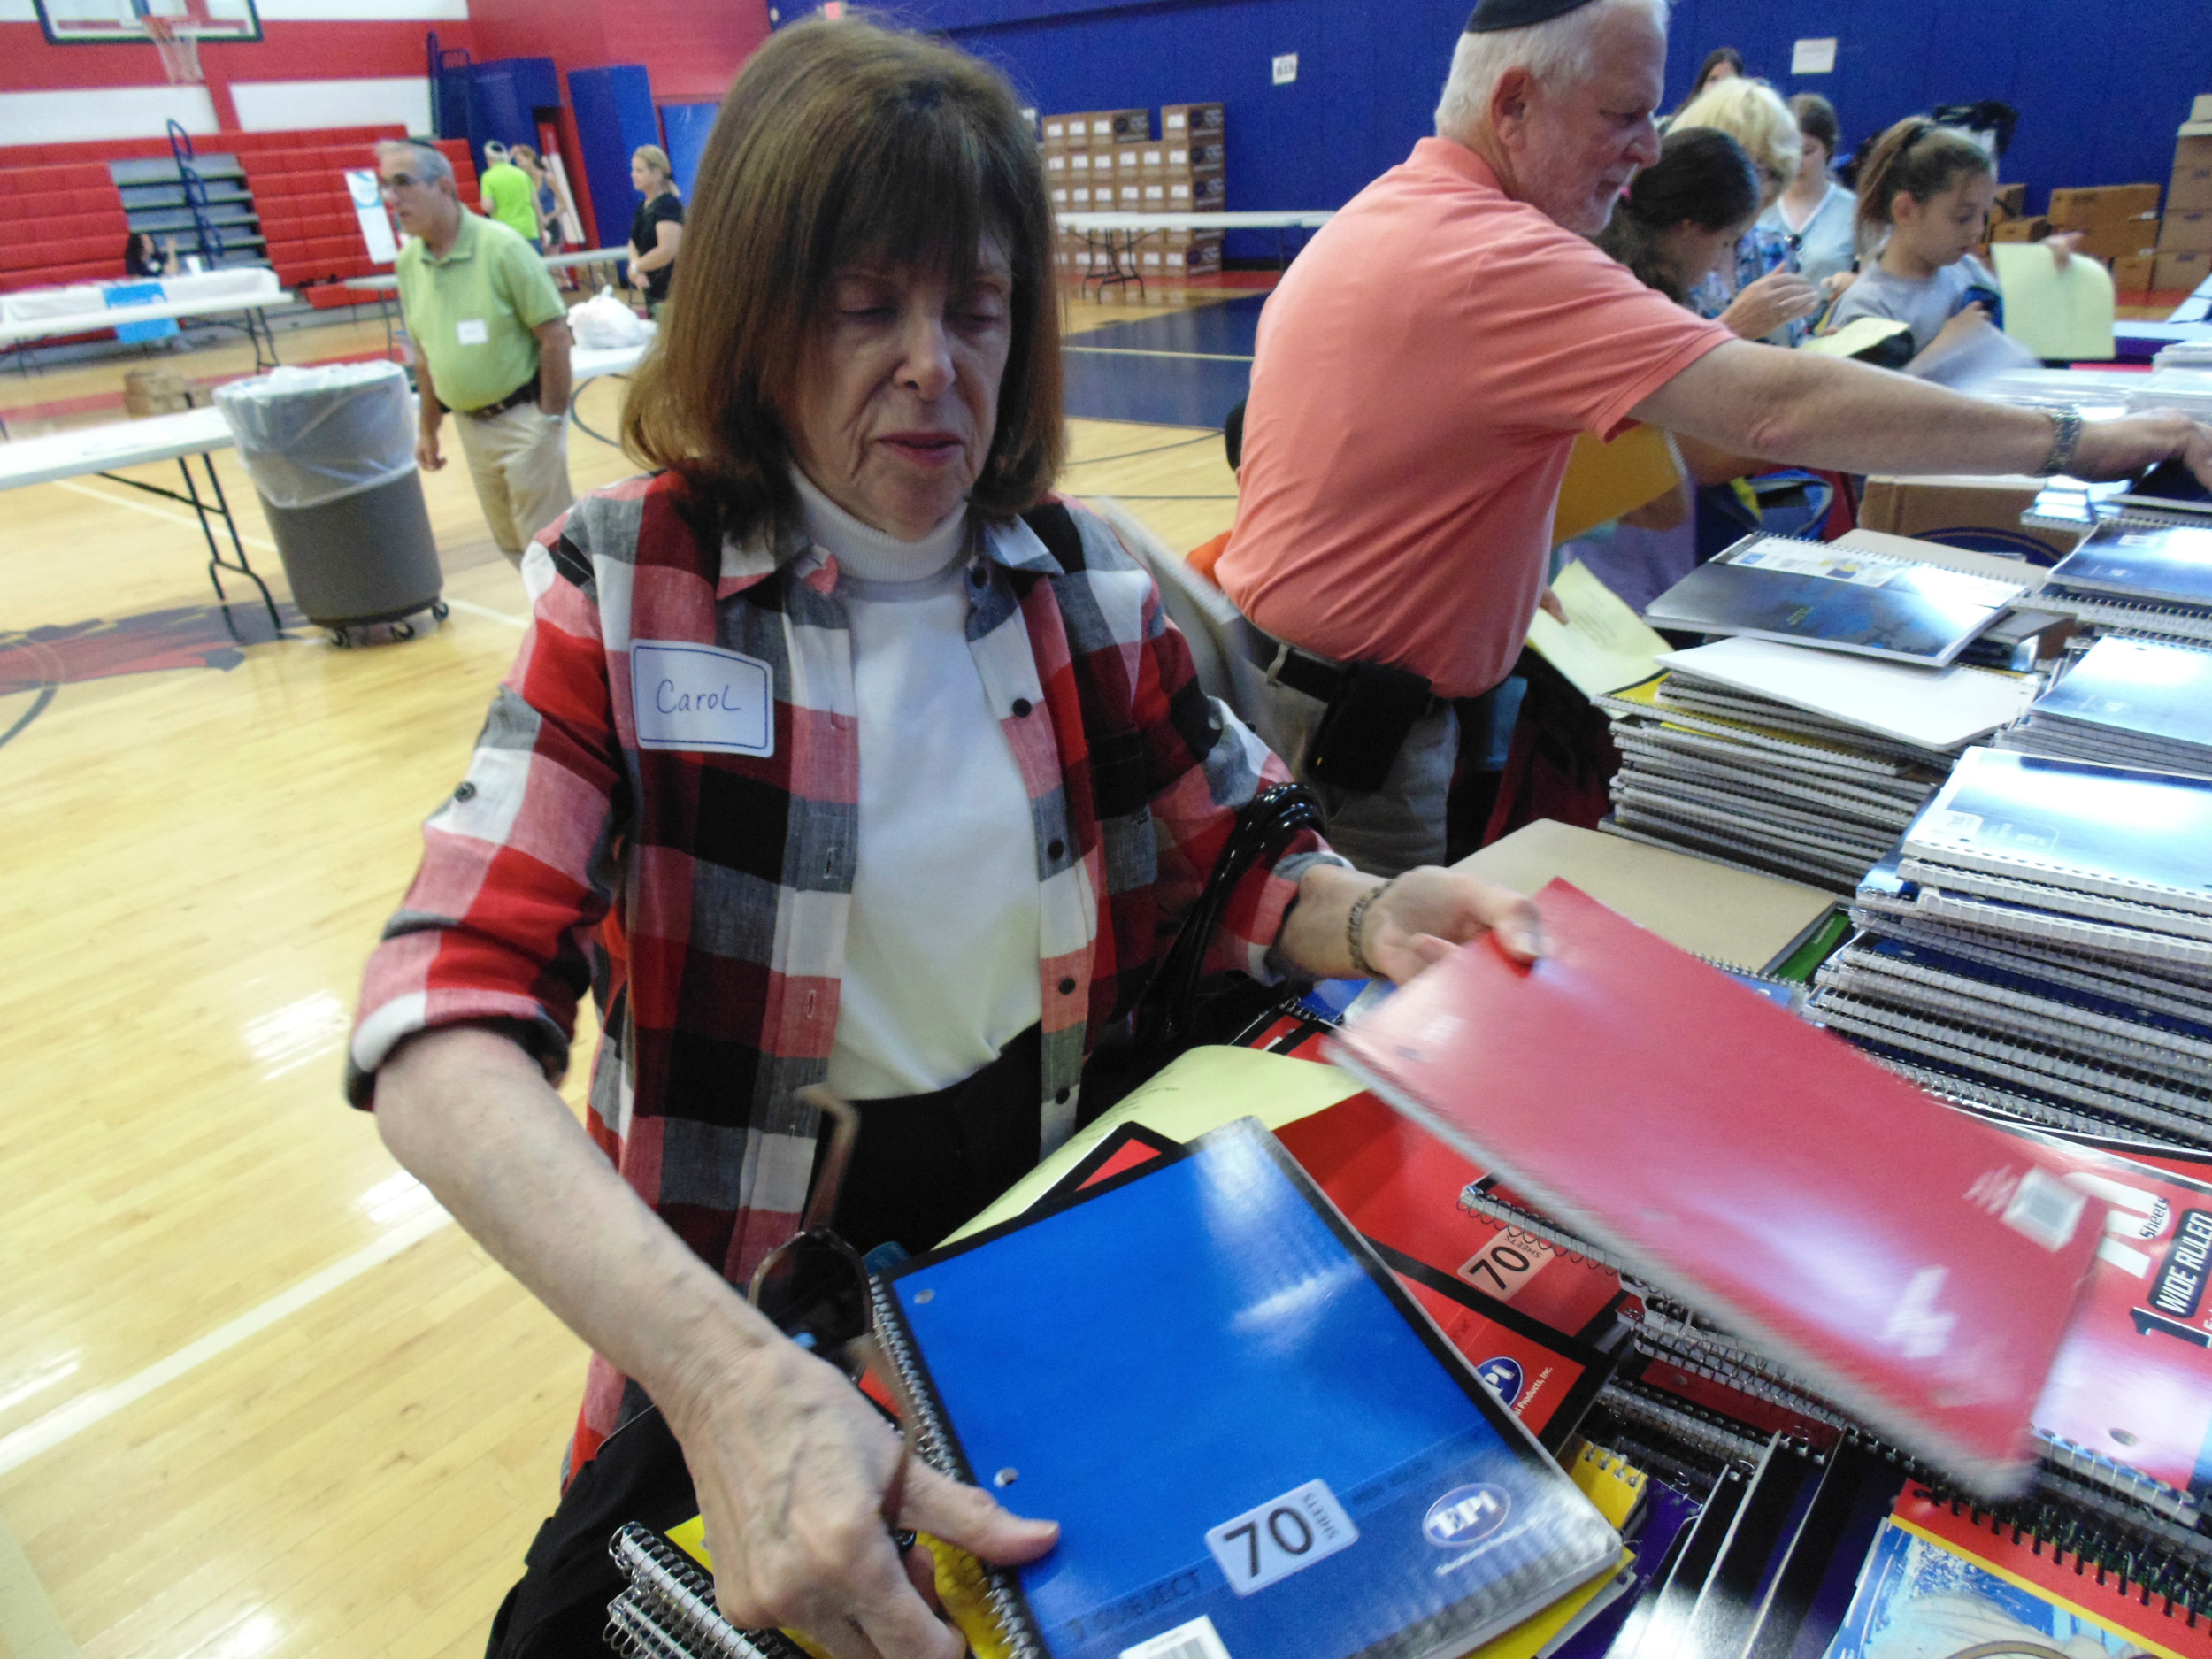 Spiral notebooks were collected by volunteer Carol Lippman before the items went into the backpacks.